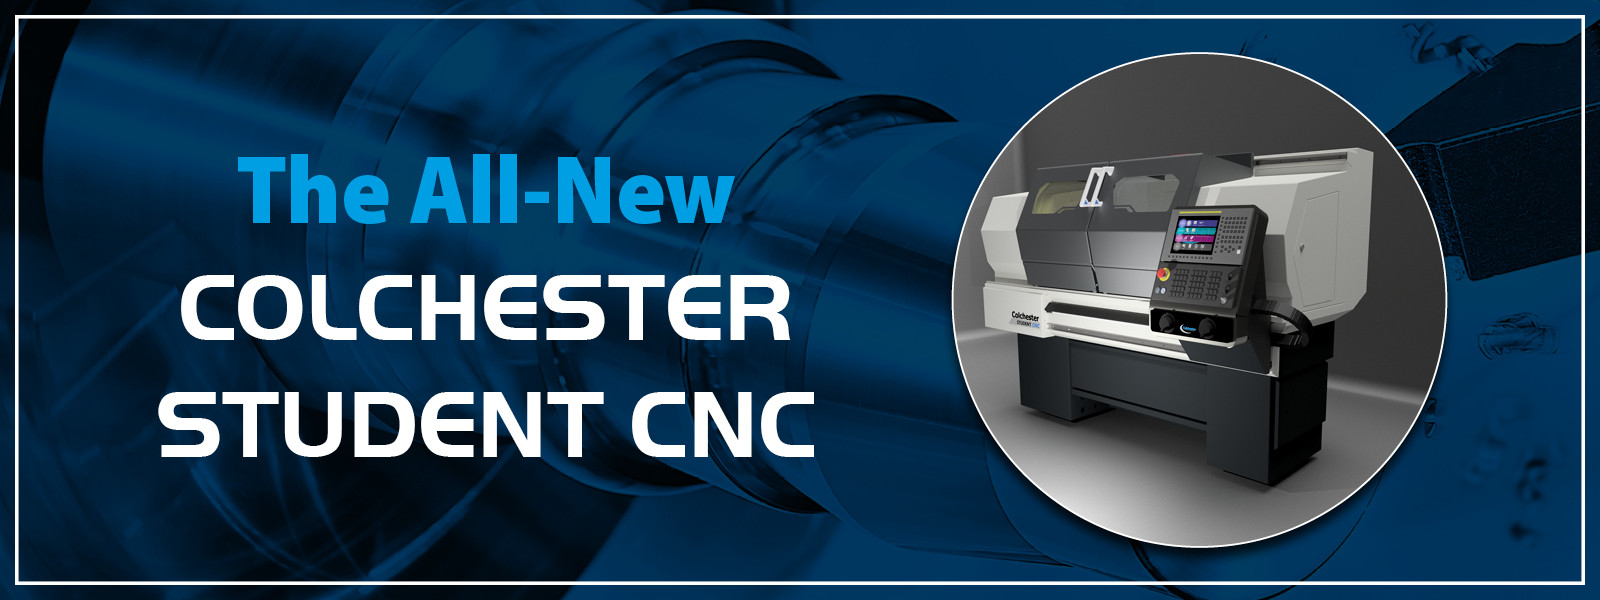 Introducing the new Colchester Student CNC Lathe